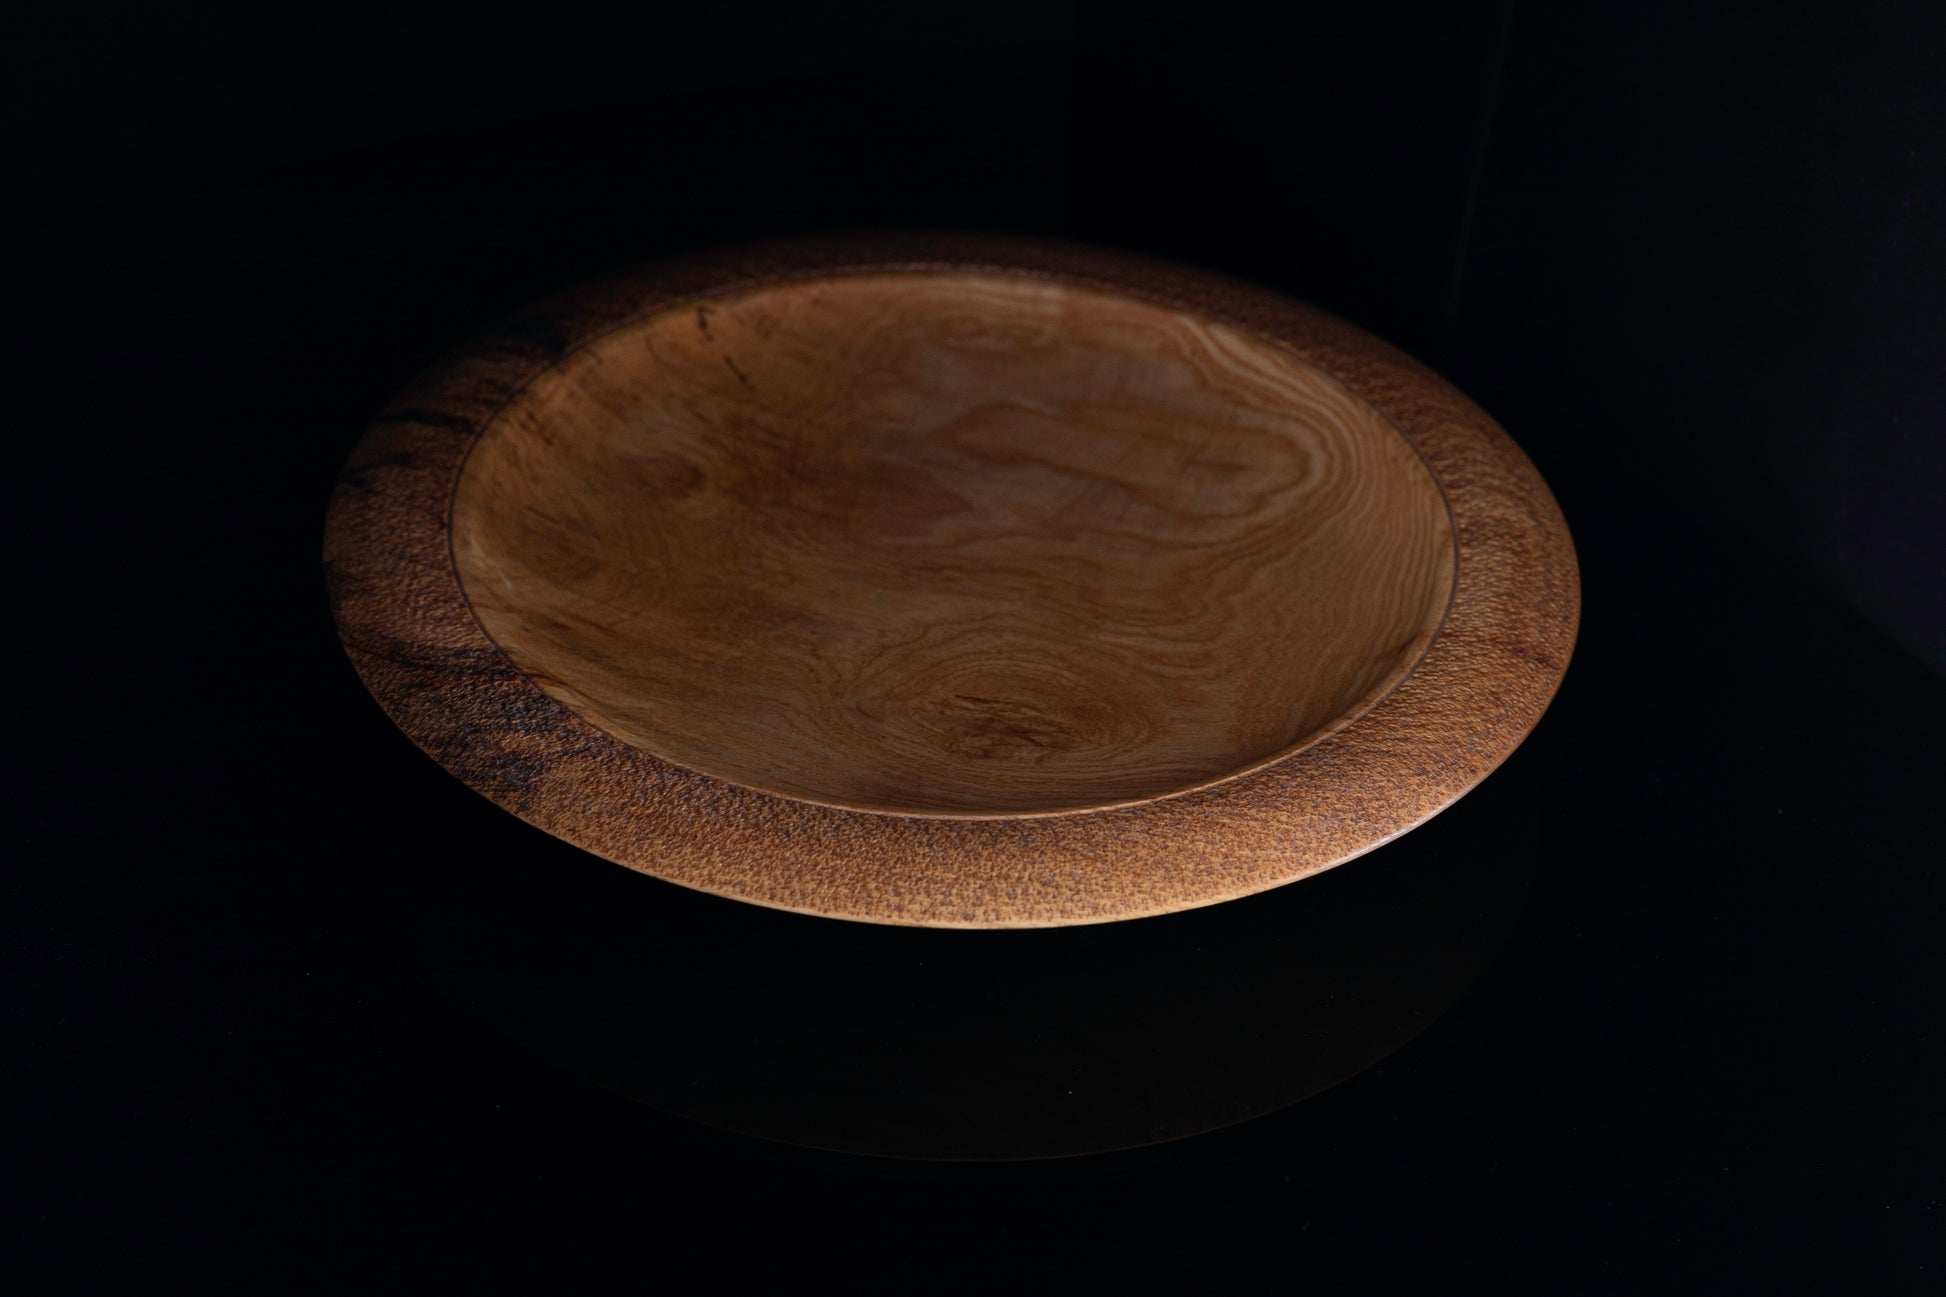 Ash Wood Bowl by Woodturner Mark Russell No322 Silver Fern Gallery